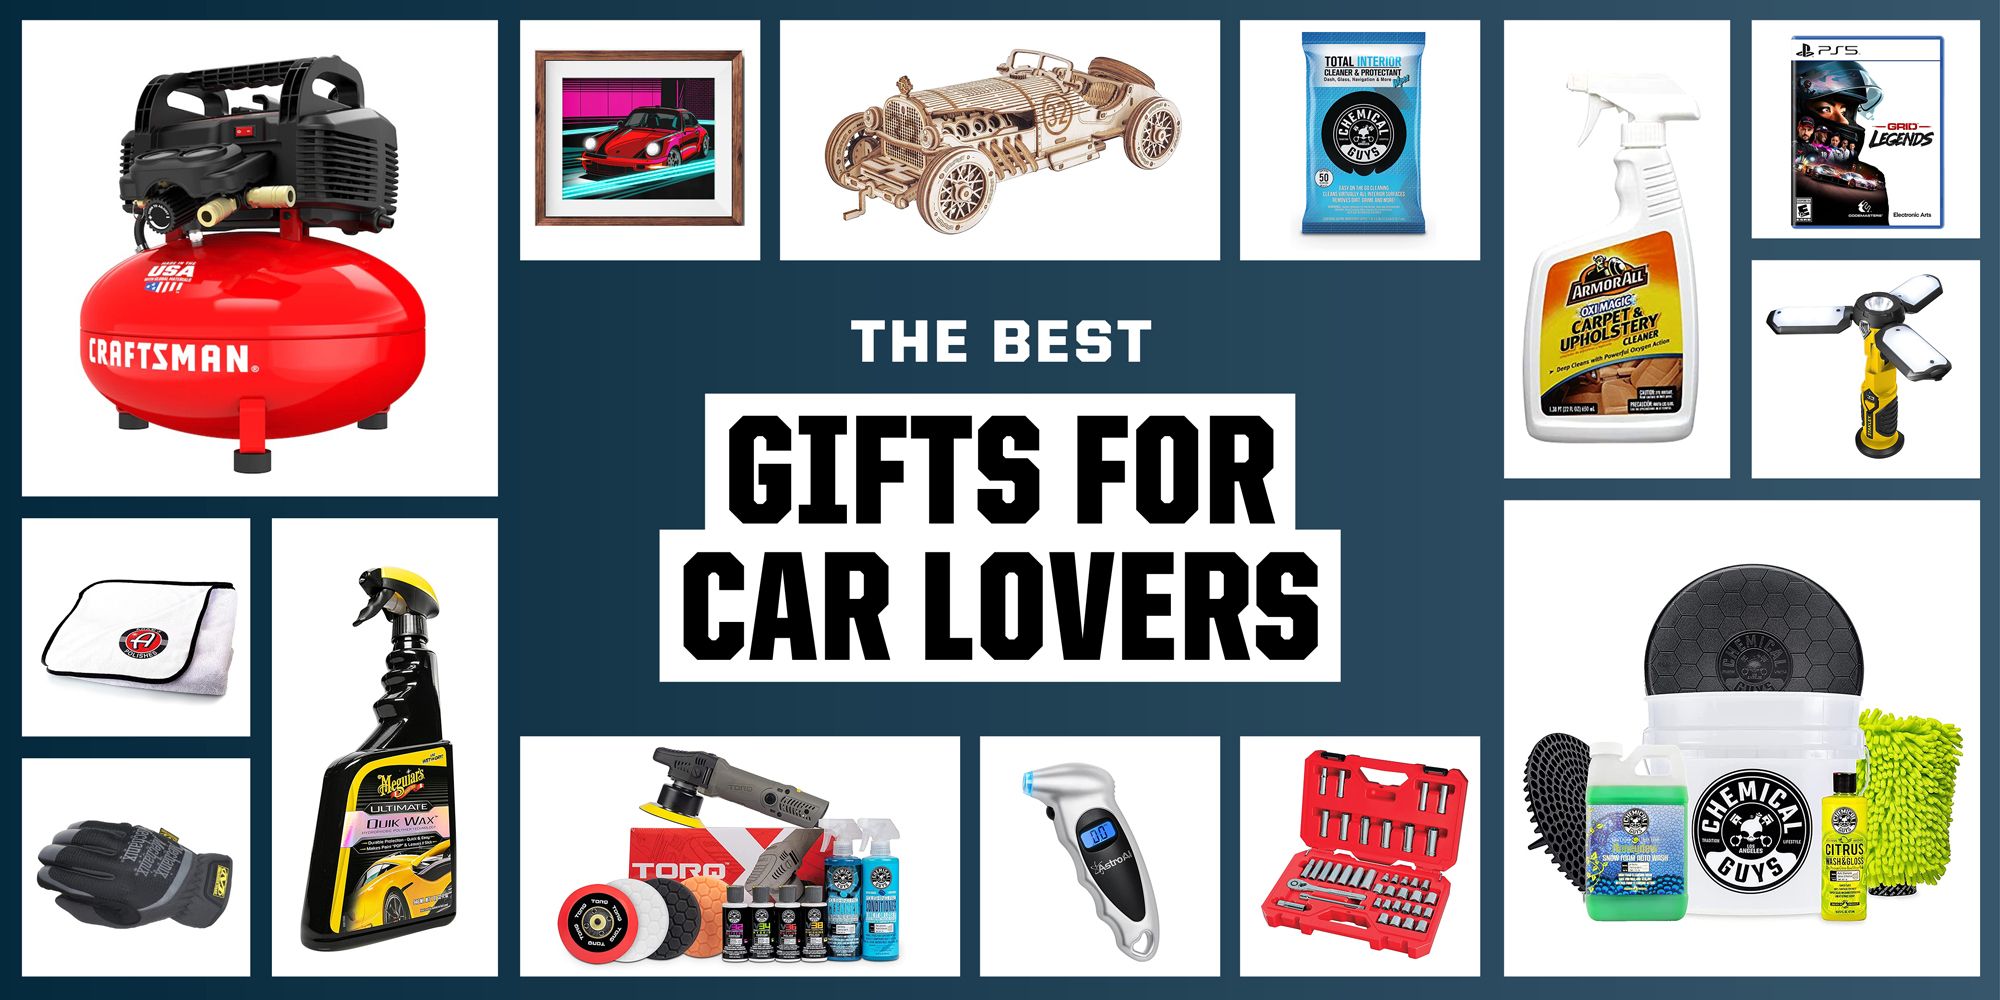 5 Awesome Valentine's Day Gift Ideas for Car Lovers - autoevolution